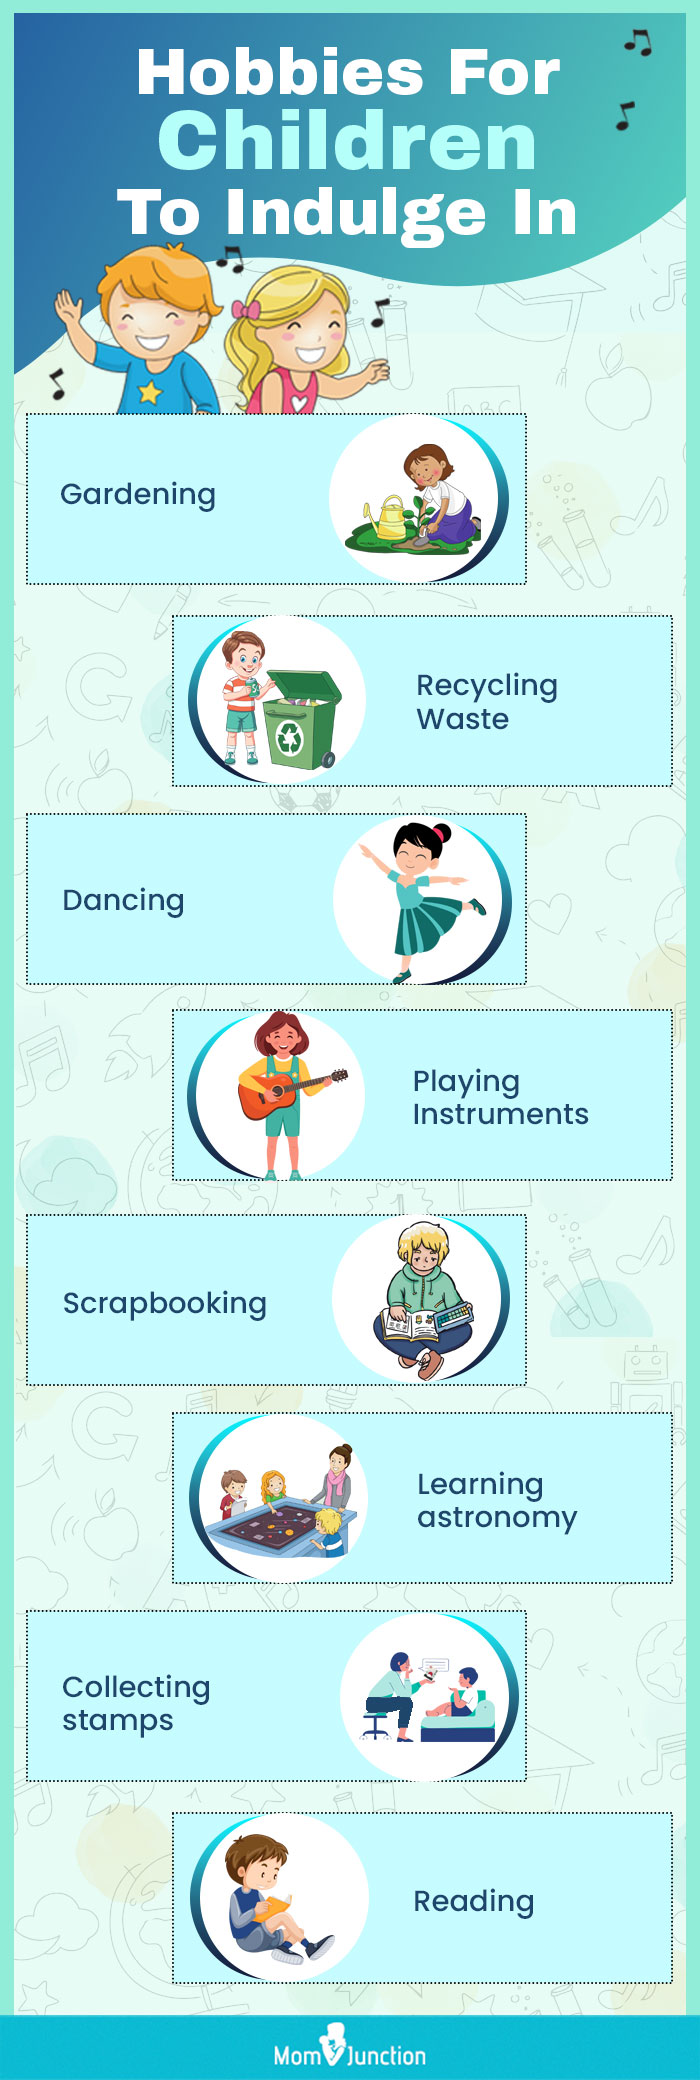 hobbies for children to indulge in (infographic)